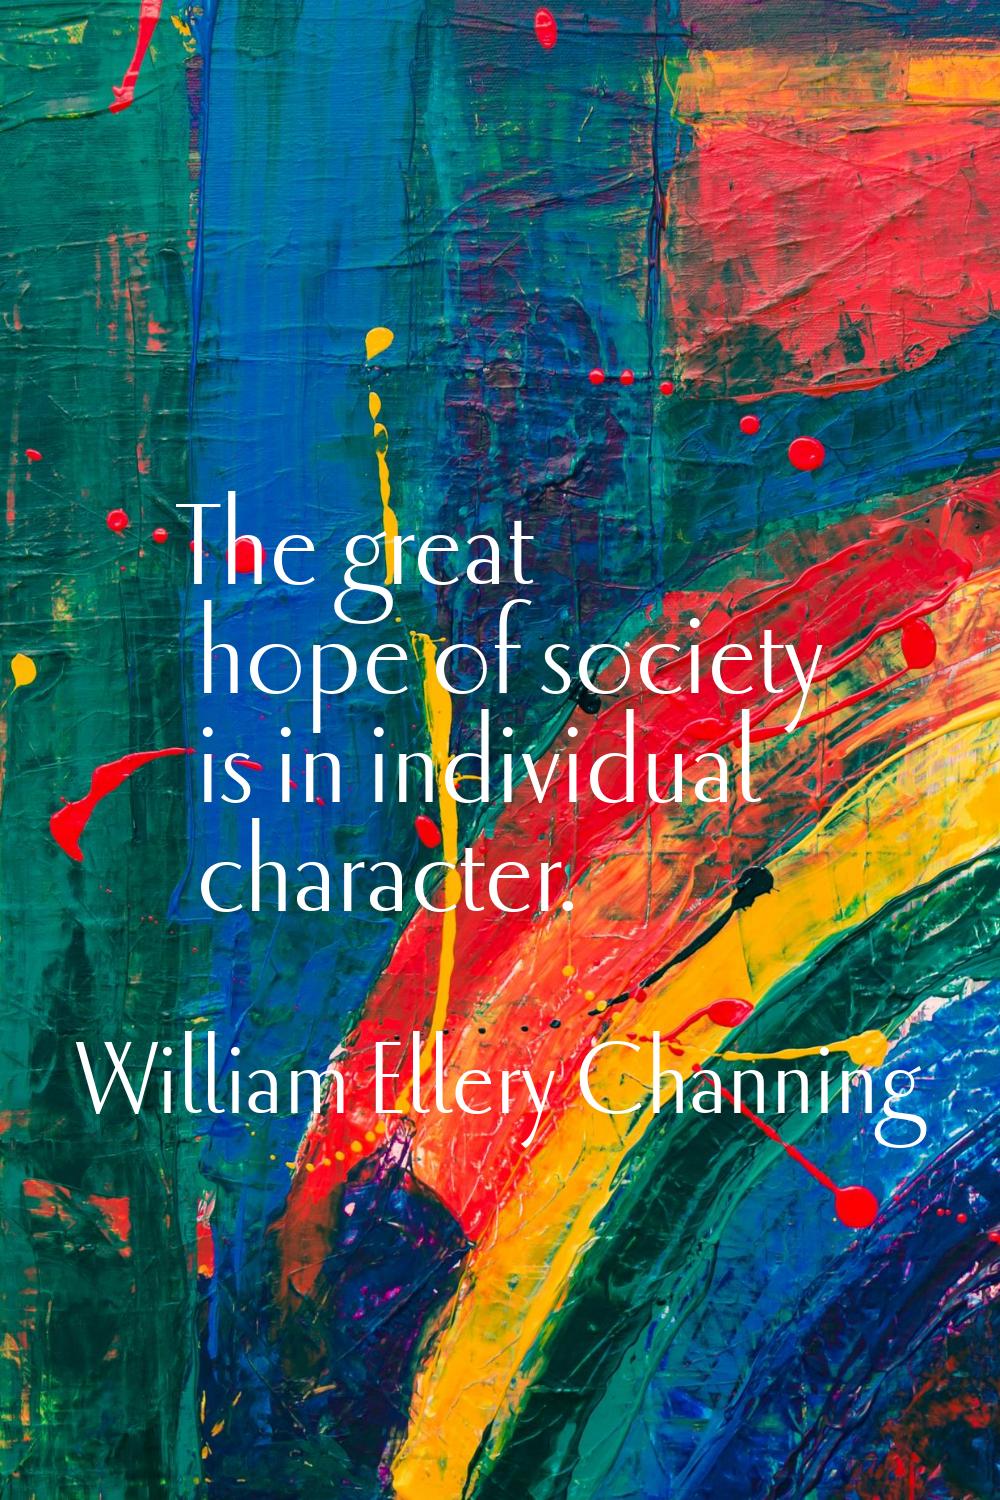 The great hope of society is in individual character.